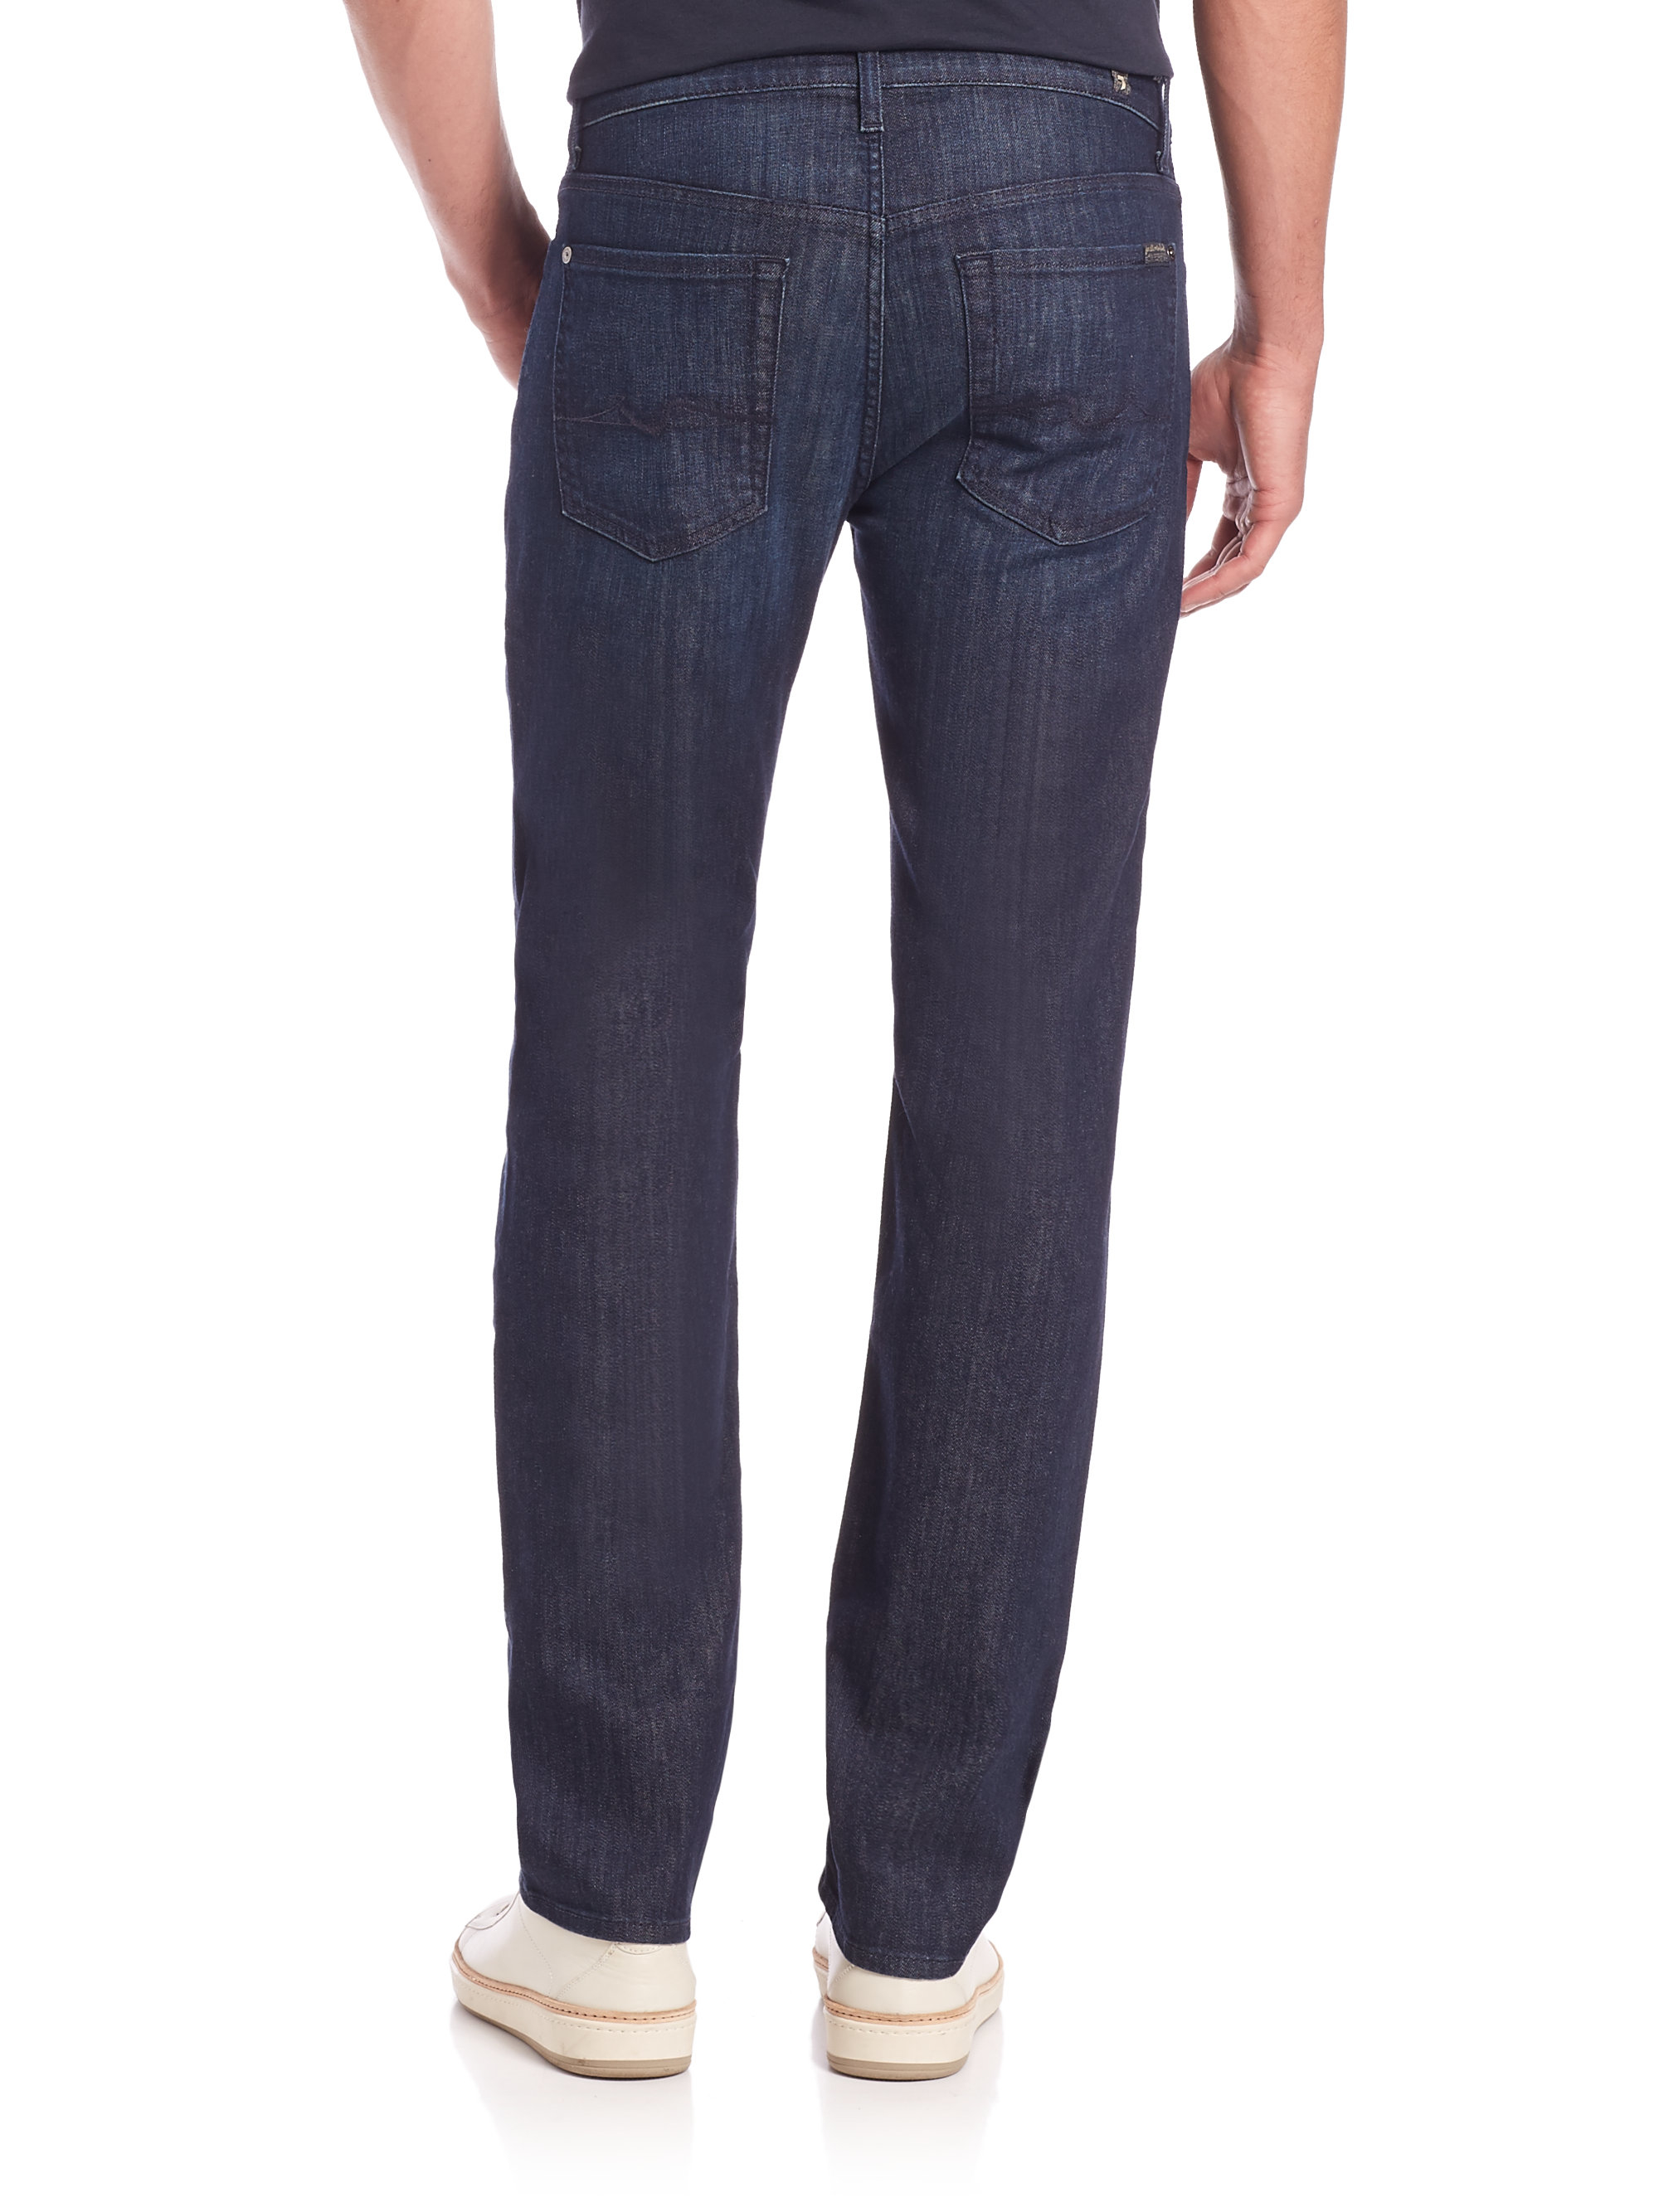 Lyst - 7 for all mankind Standard Straight-leg Jeans in Blue for Men